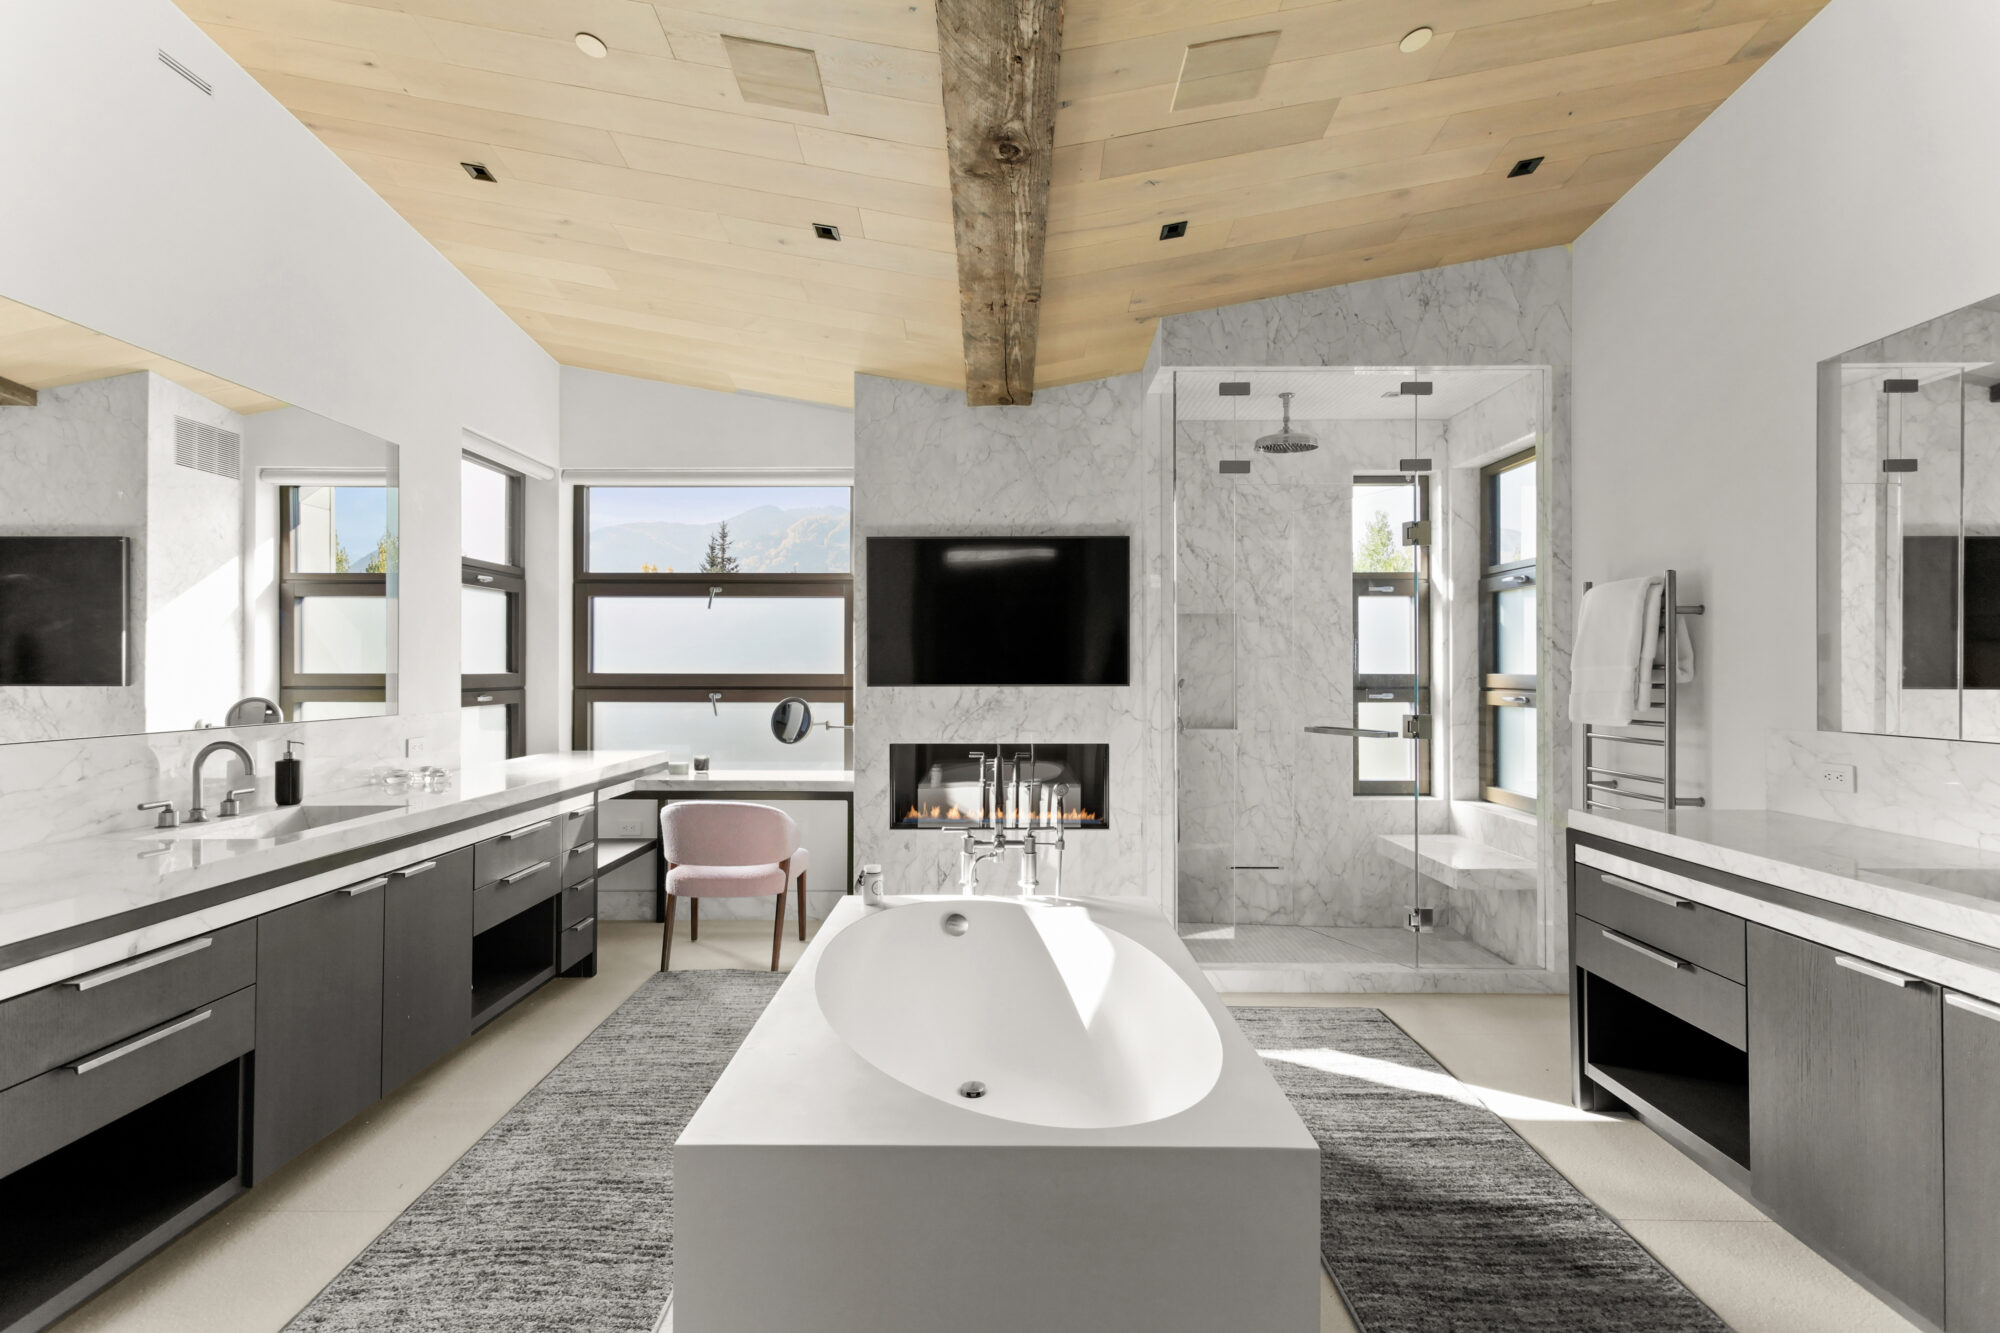 primary bathroom with center tub, wood beams and natural light